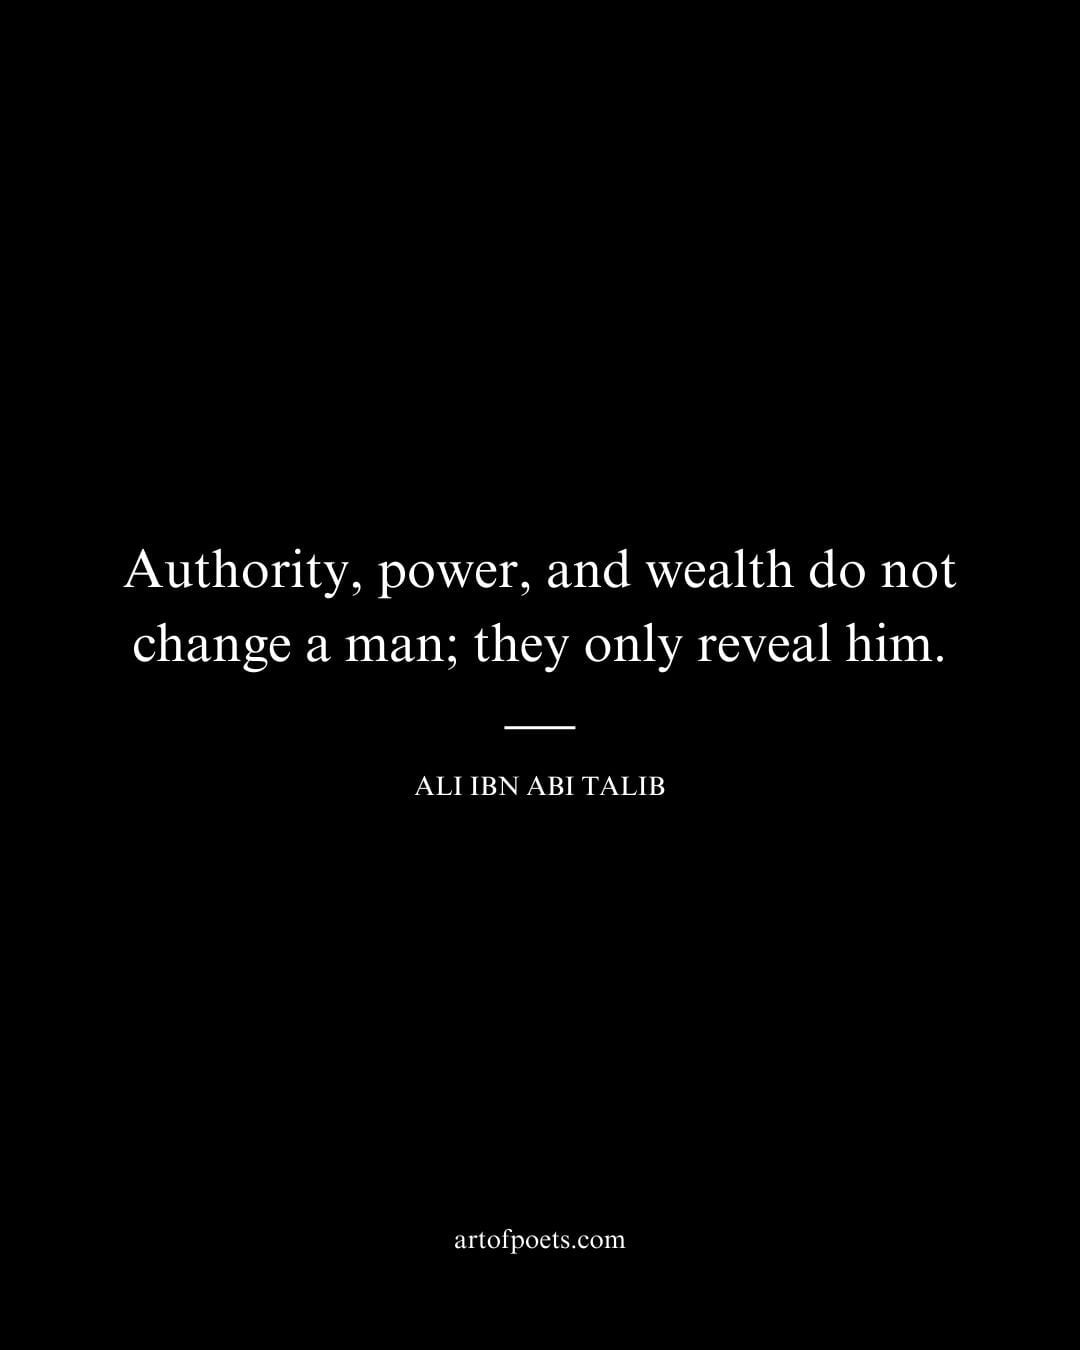 Authority power and wealth do not change a man they only reveal him